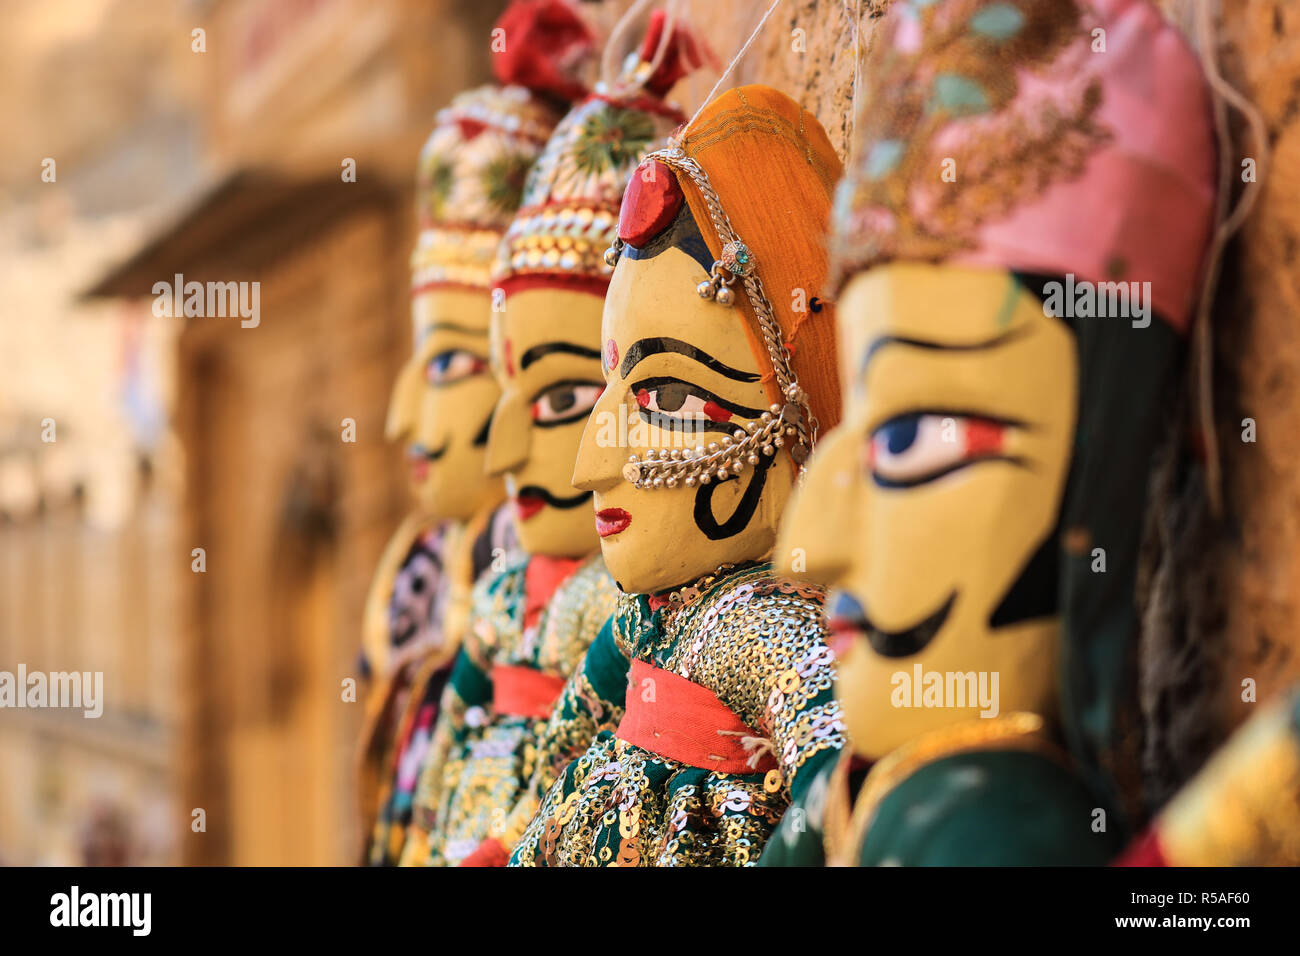 Rajasthani puppets (Kathputli) have been displayed on a shop at Jaisalmer Fort, Rajasthan. Kathputli is a string puppet theatre, native to Rajasthan, Stock Photo